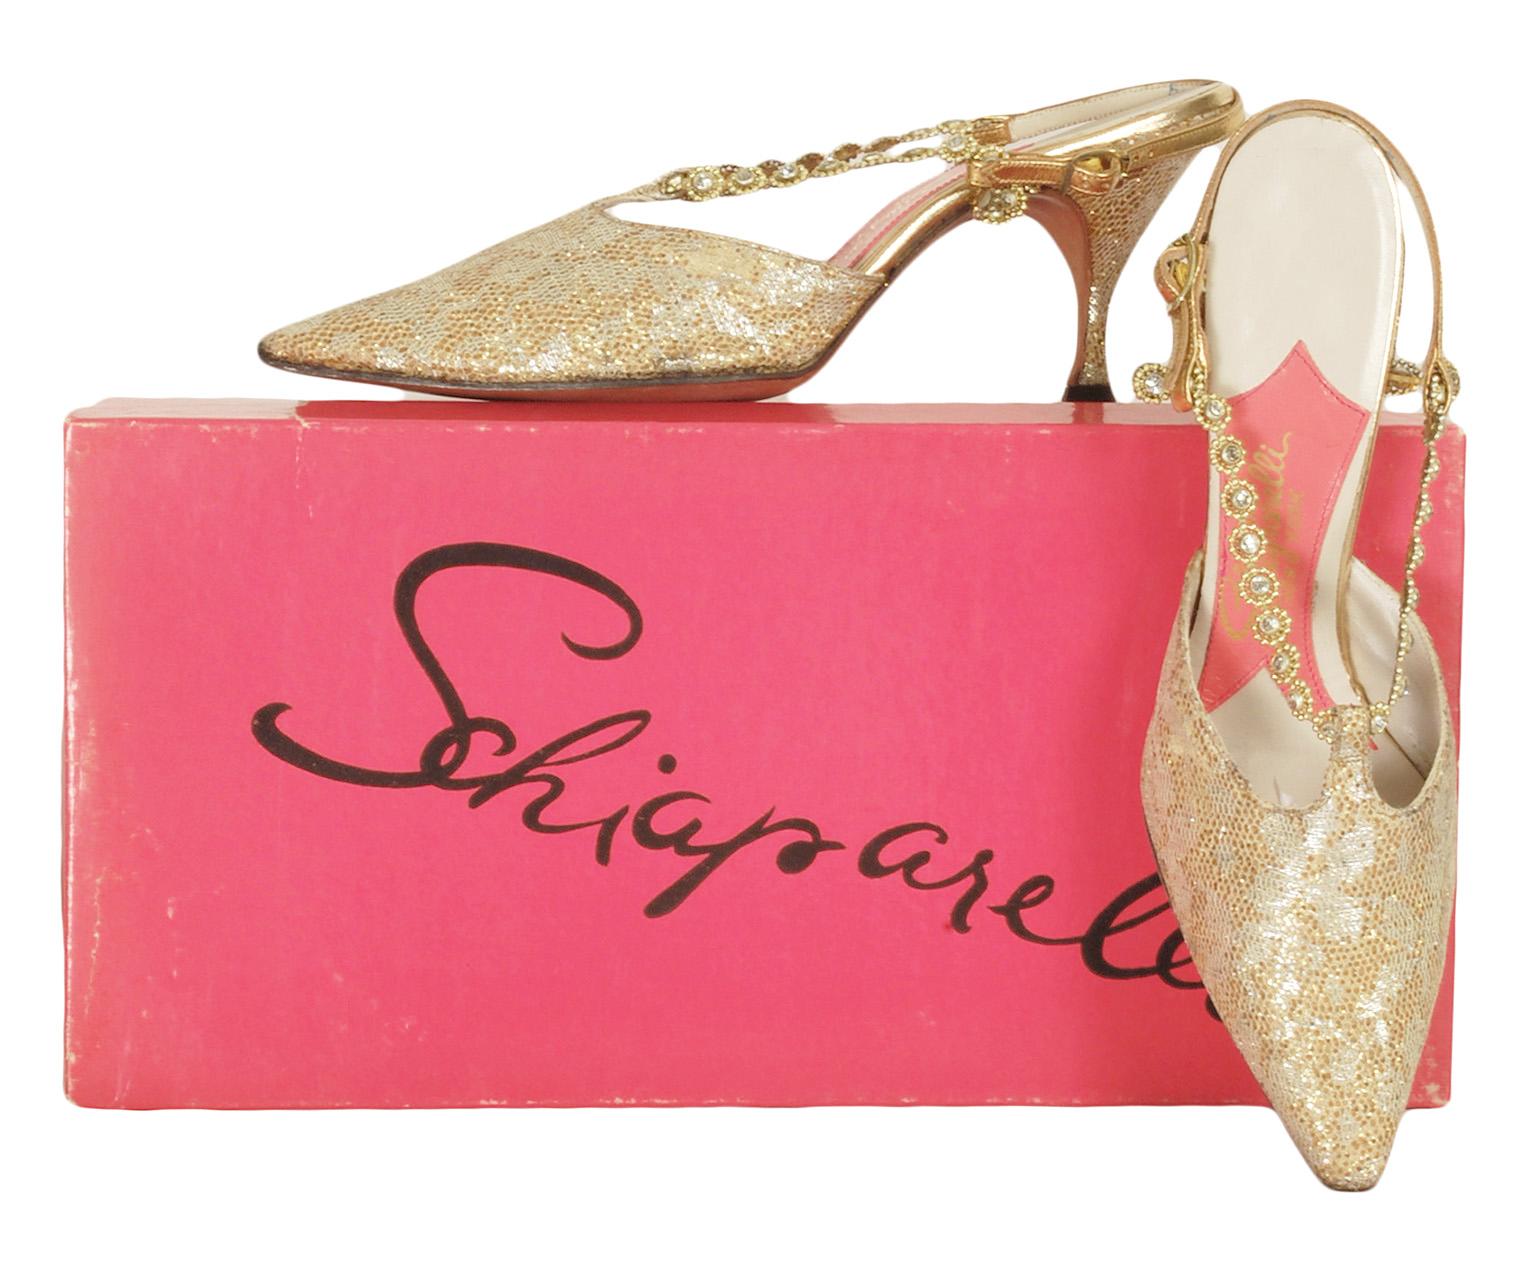 Owned by a French expatriate and shoe-hoarder, these incomparable slingbacks were adored but have remained unworn in their original box for sixty years. Featuring a modest, wearable heel, their gold and silver ground is overlain with lace netting to